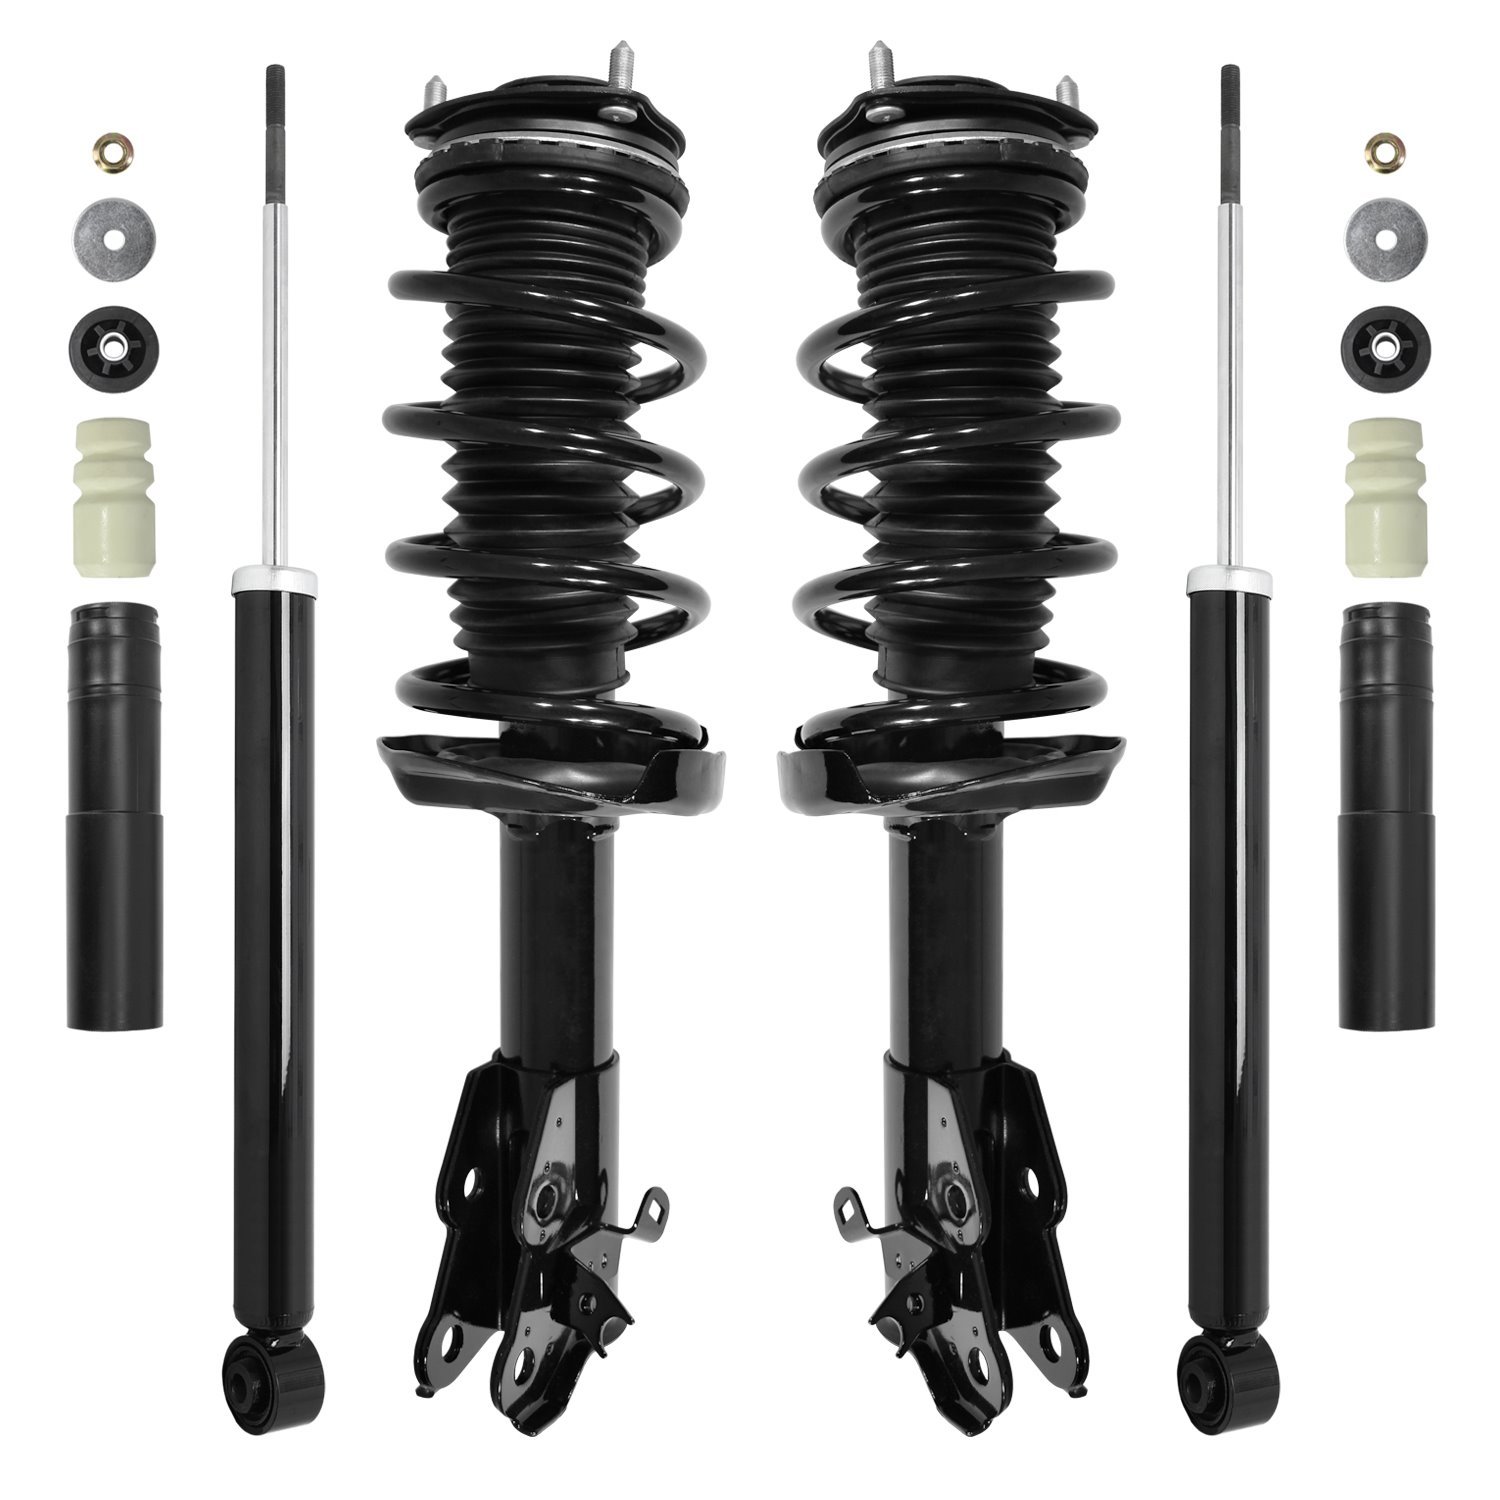 4-11815-253040-001 Front & Rear Suspension Strut & Coil Spring Assembly Fits Select Acura CSX, Honda Civic